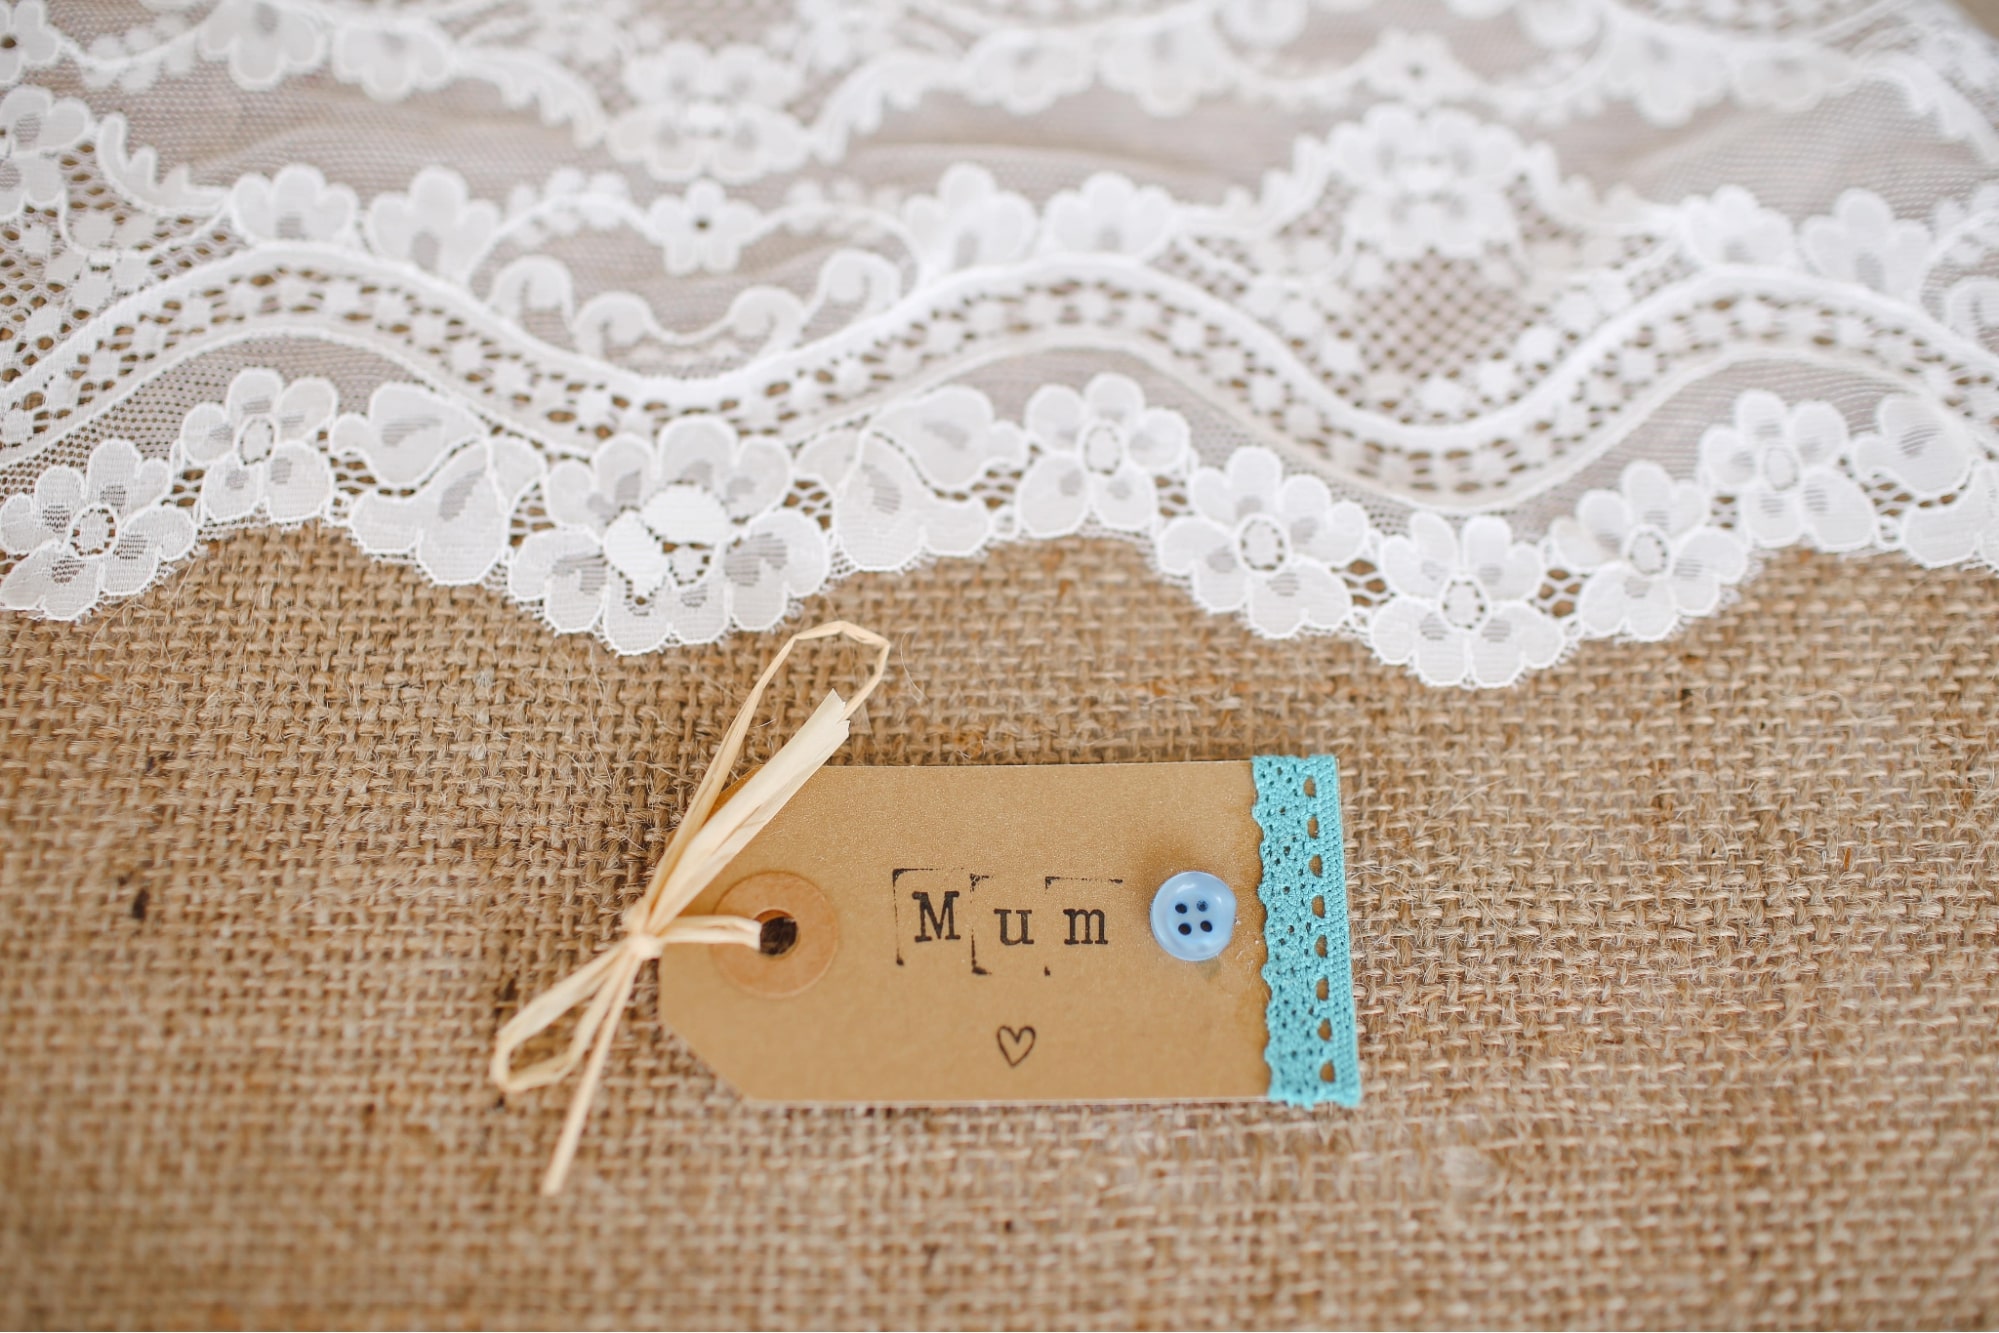 A handmade tag for a Mother’s Day gift on a burlap and lace table runner